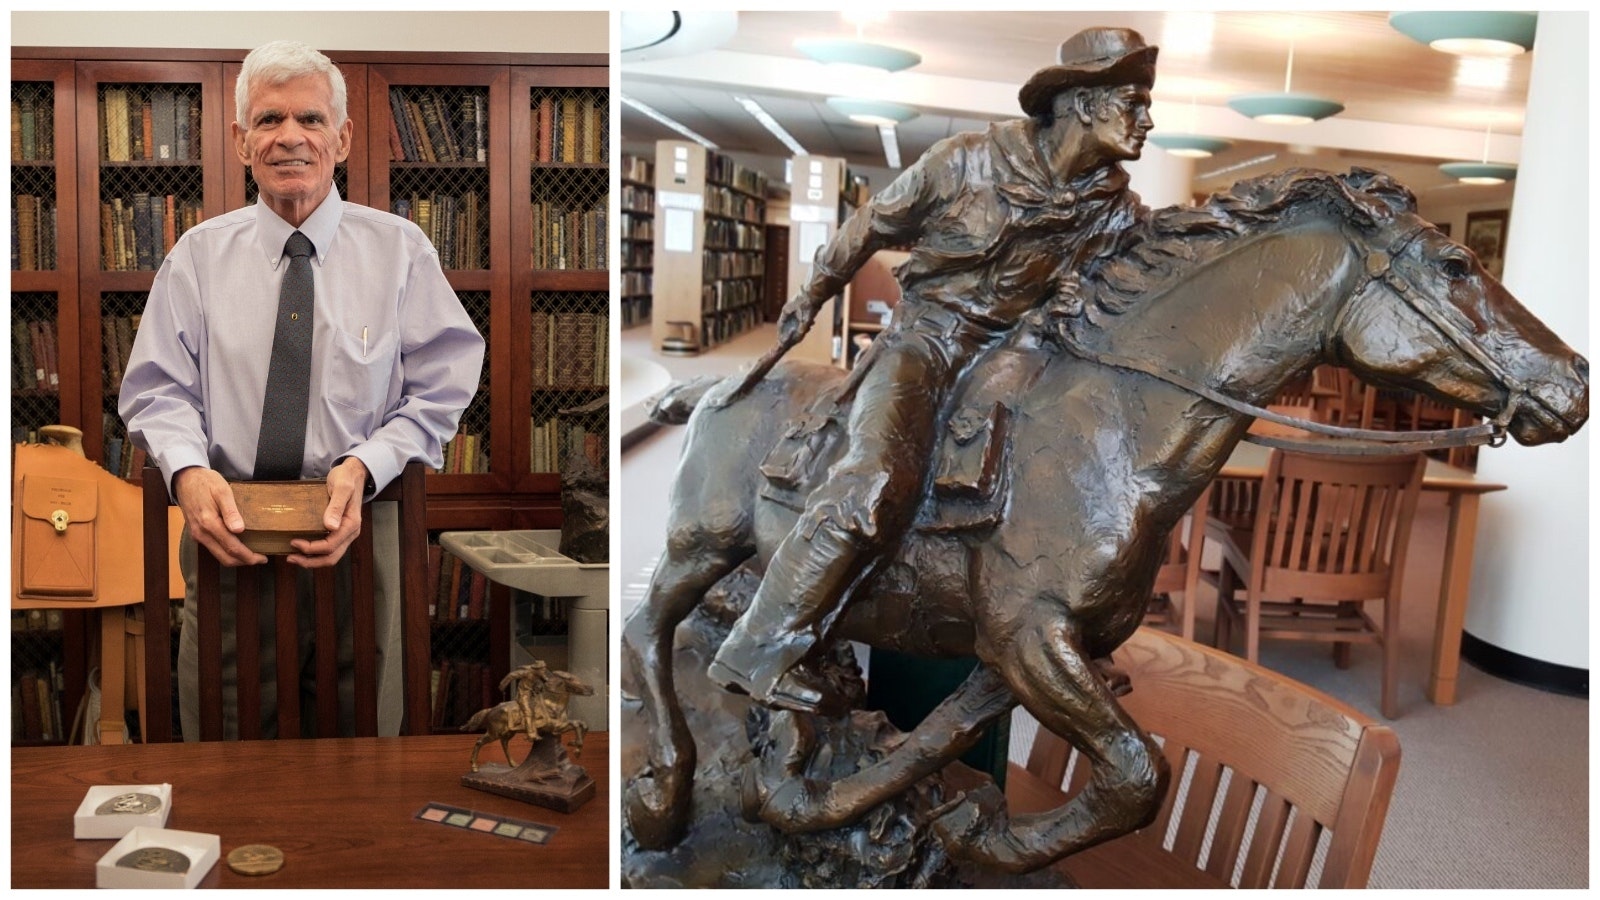 The Pony Express collection of Joe Nardone has an estimated $1.5 million worth of artifacts, some of which he wanted the Fort Caspar Museum to have as the northernmost outpost on the Pony Express route.